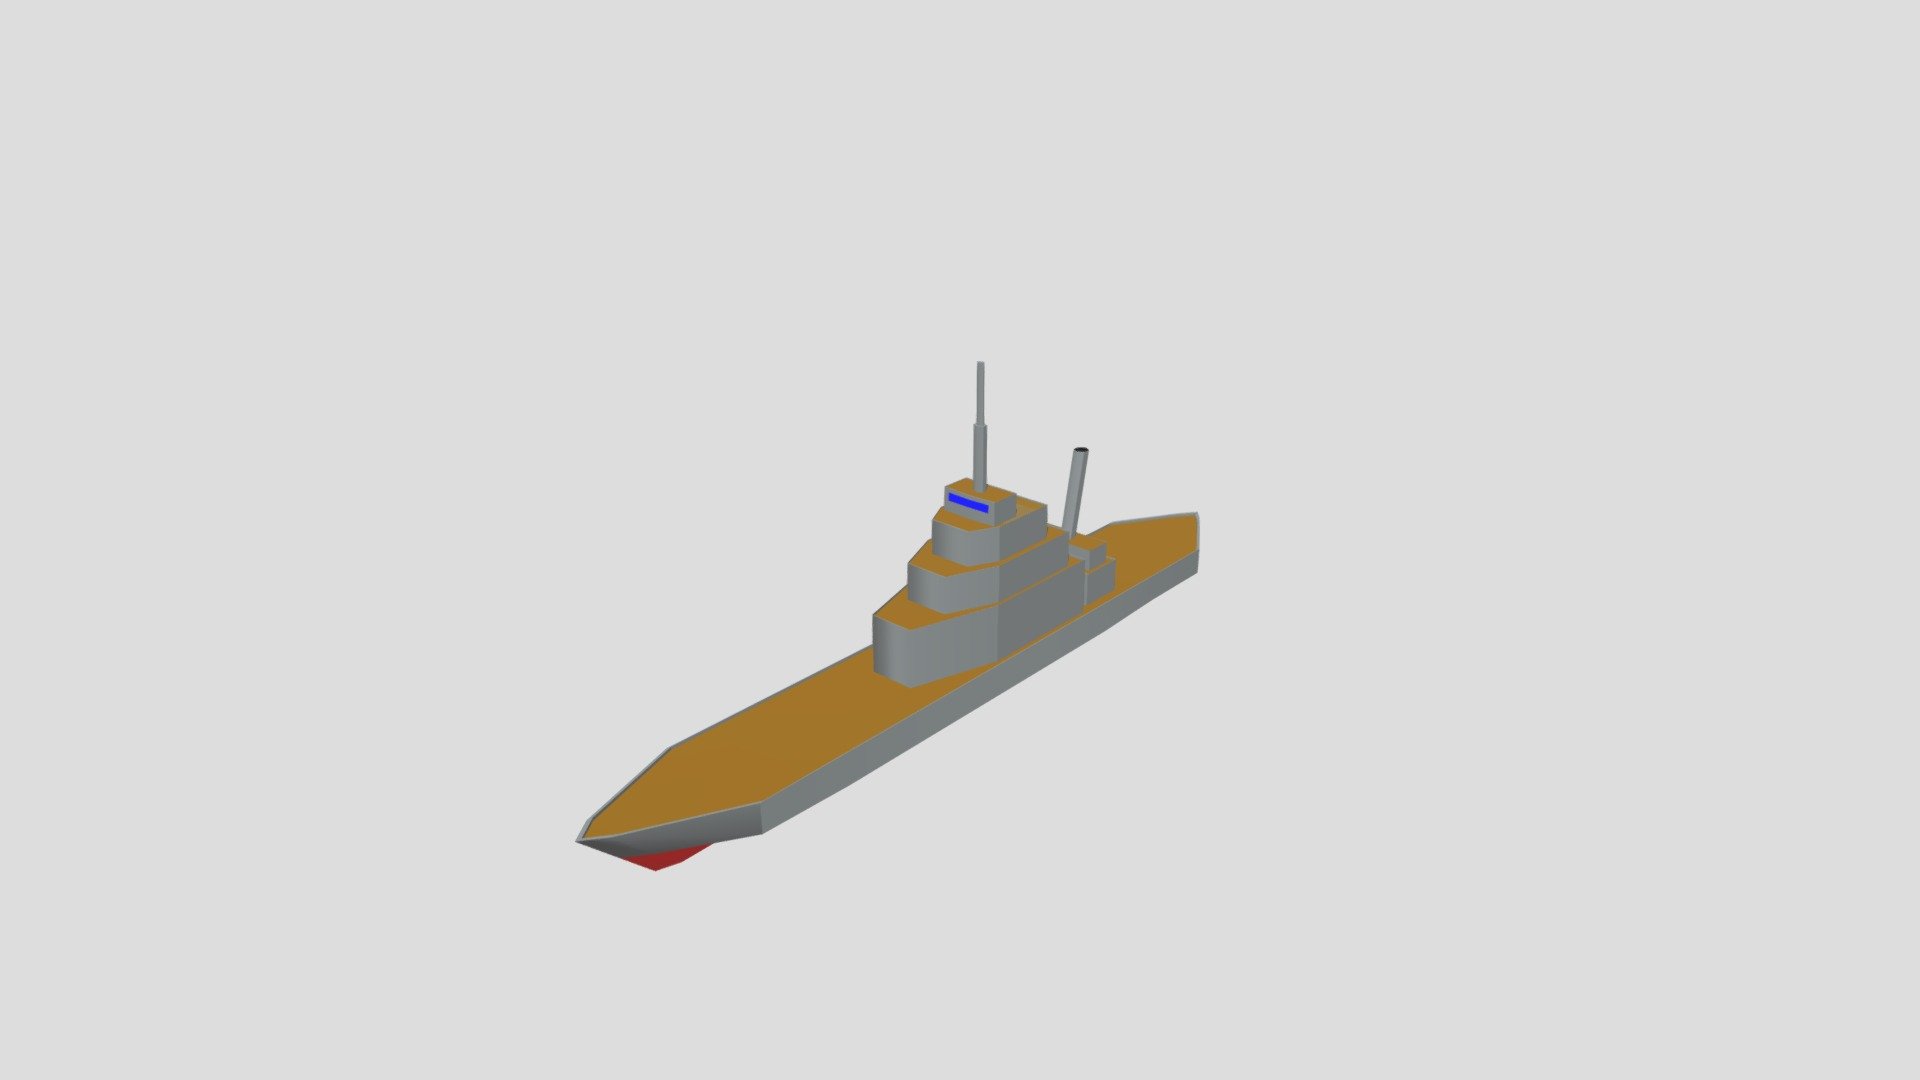 It's a ww2 Style BattleShip Without turrets - Battle Ship Old Style Without Cannons - 3D model by maherajpatel442 3d model